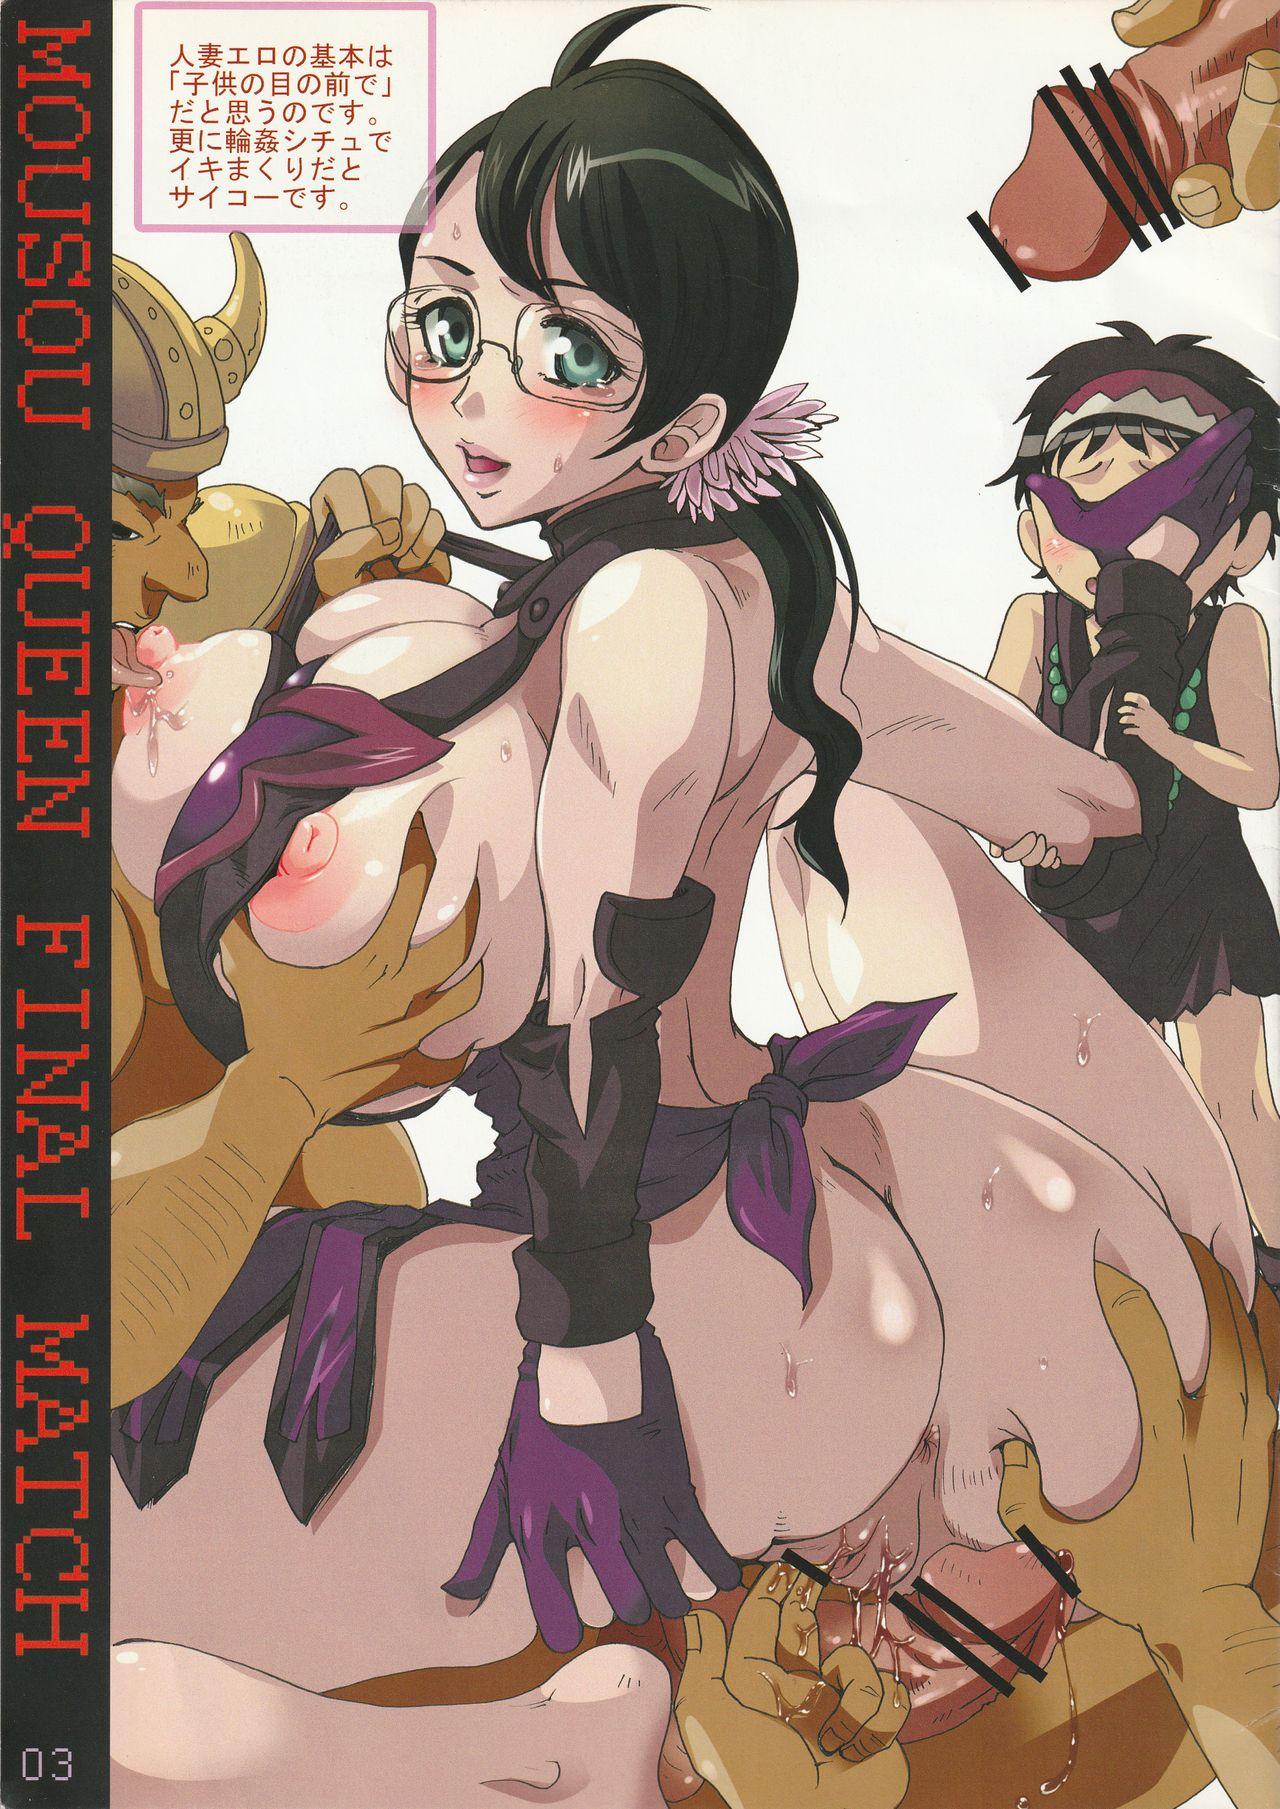 Flaquita Mousou Oujo Kettei Sen - Queens blade Family Roleplay - Page 3